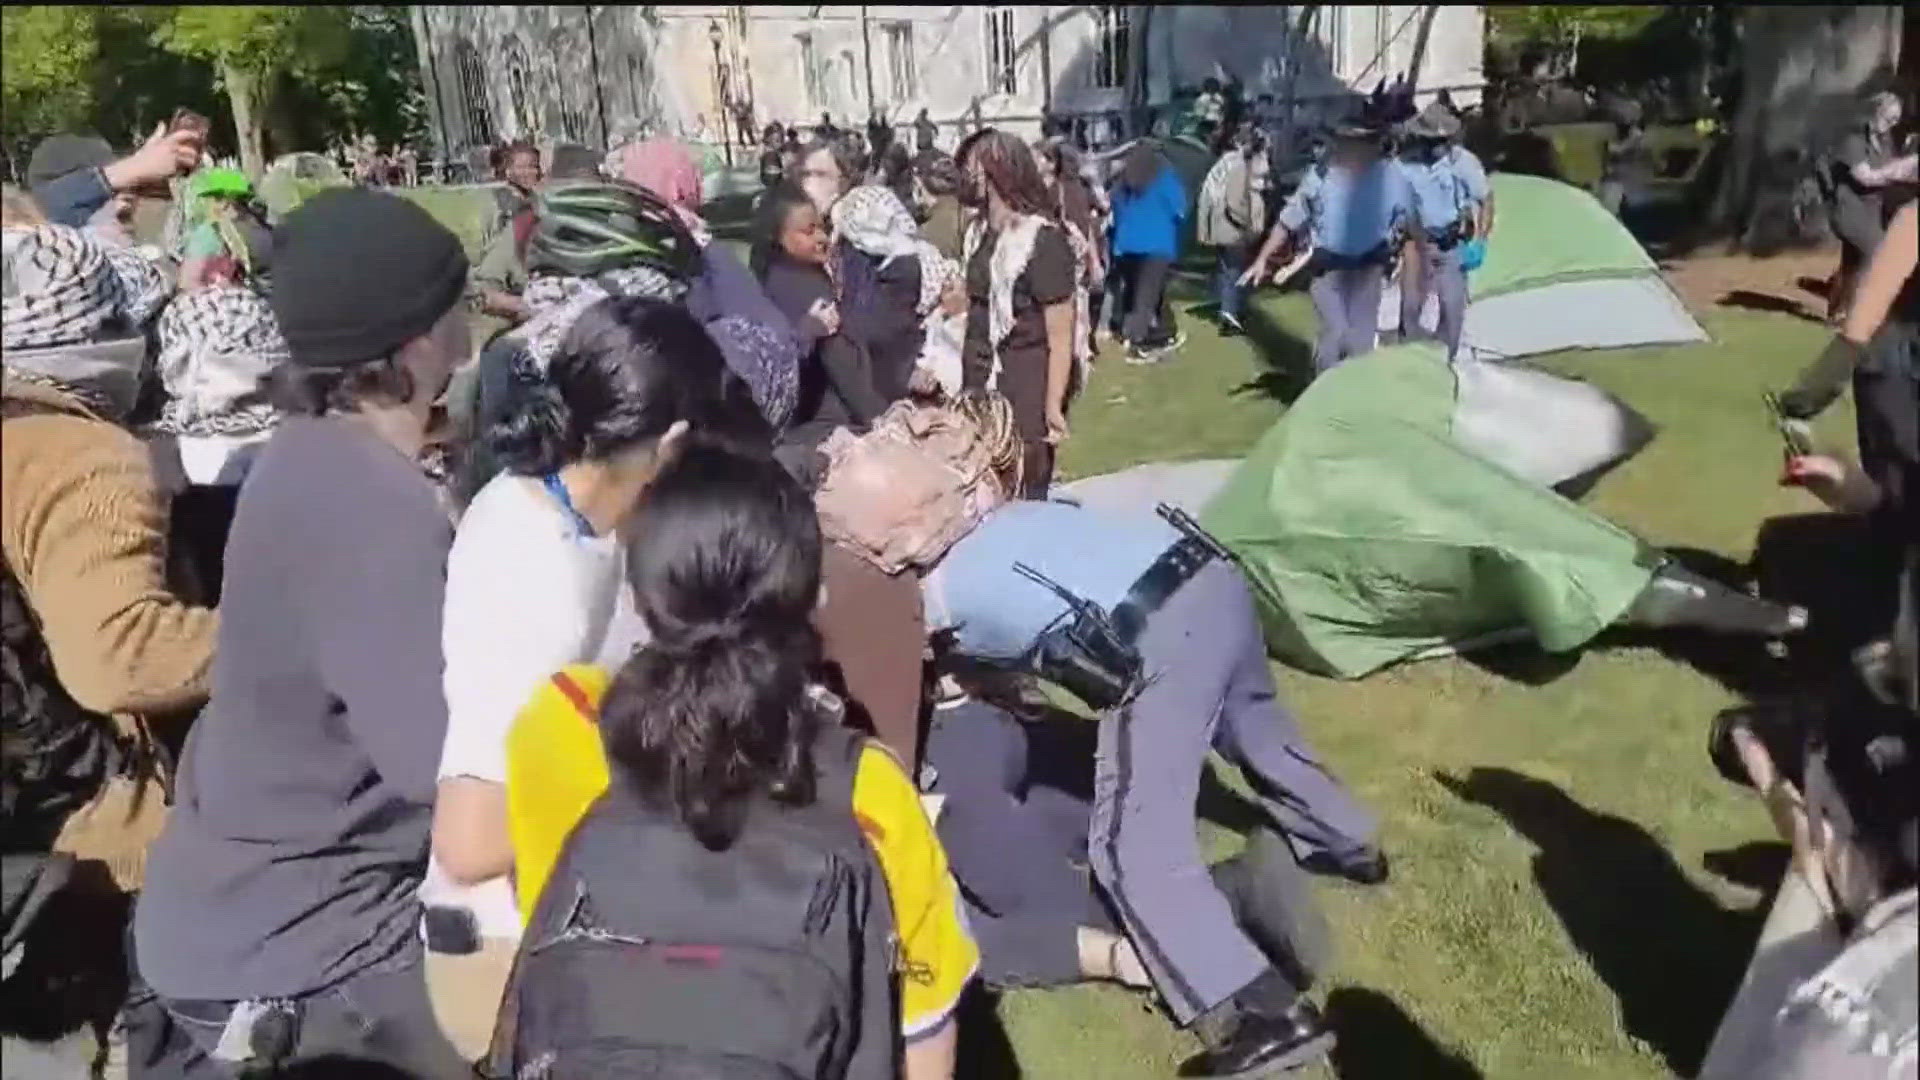 Students at Emory are speaking out after multiple people were arrested during a campus protest that turned chaotic as police broke it up.